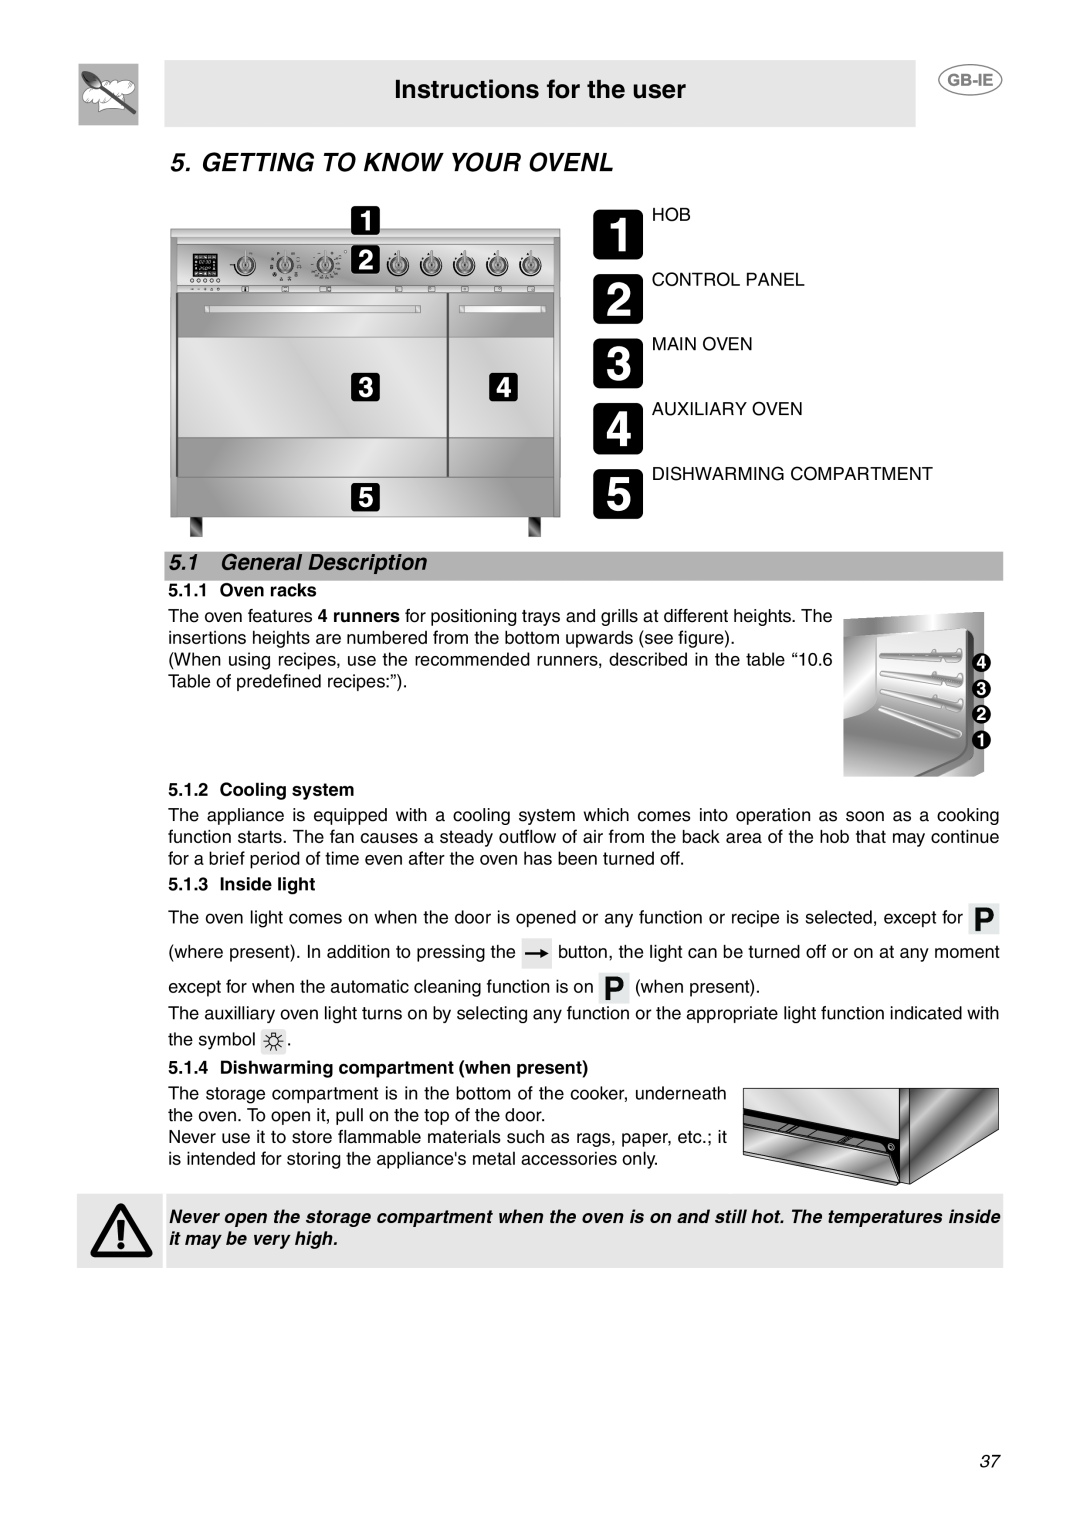 Smeg CE92IPX manual Instructions for the user, Getting To Know Your Ovenl, General Description, Oven racks, Cooling system 